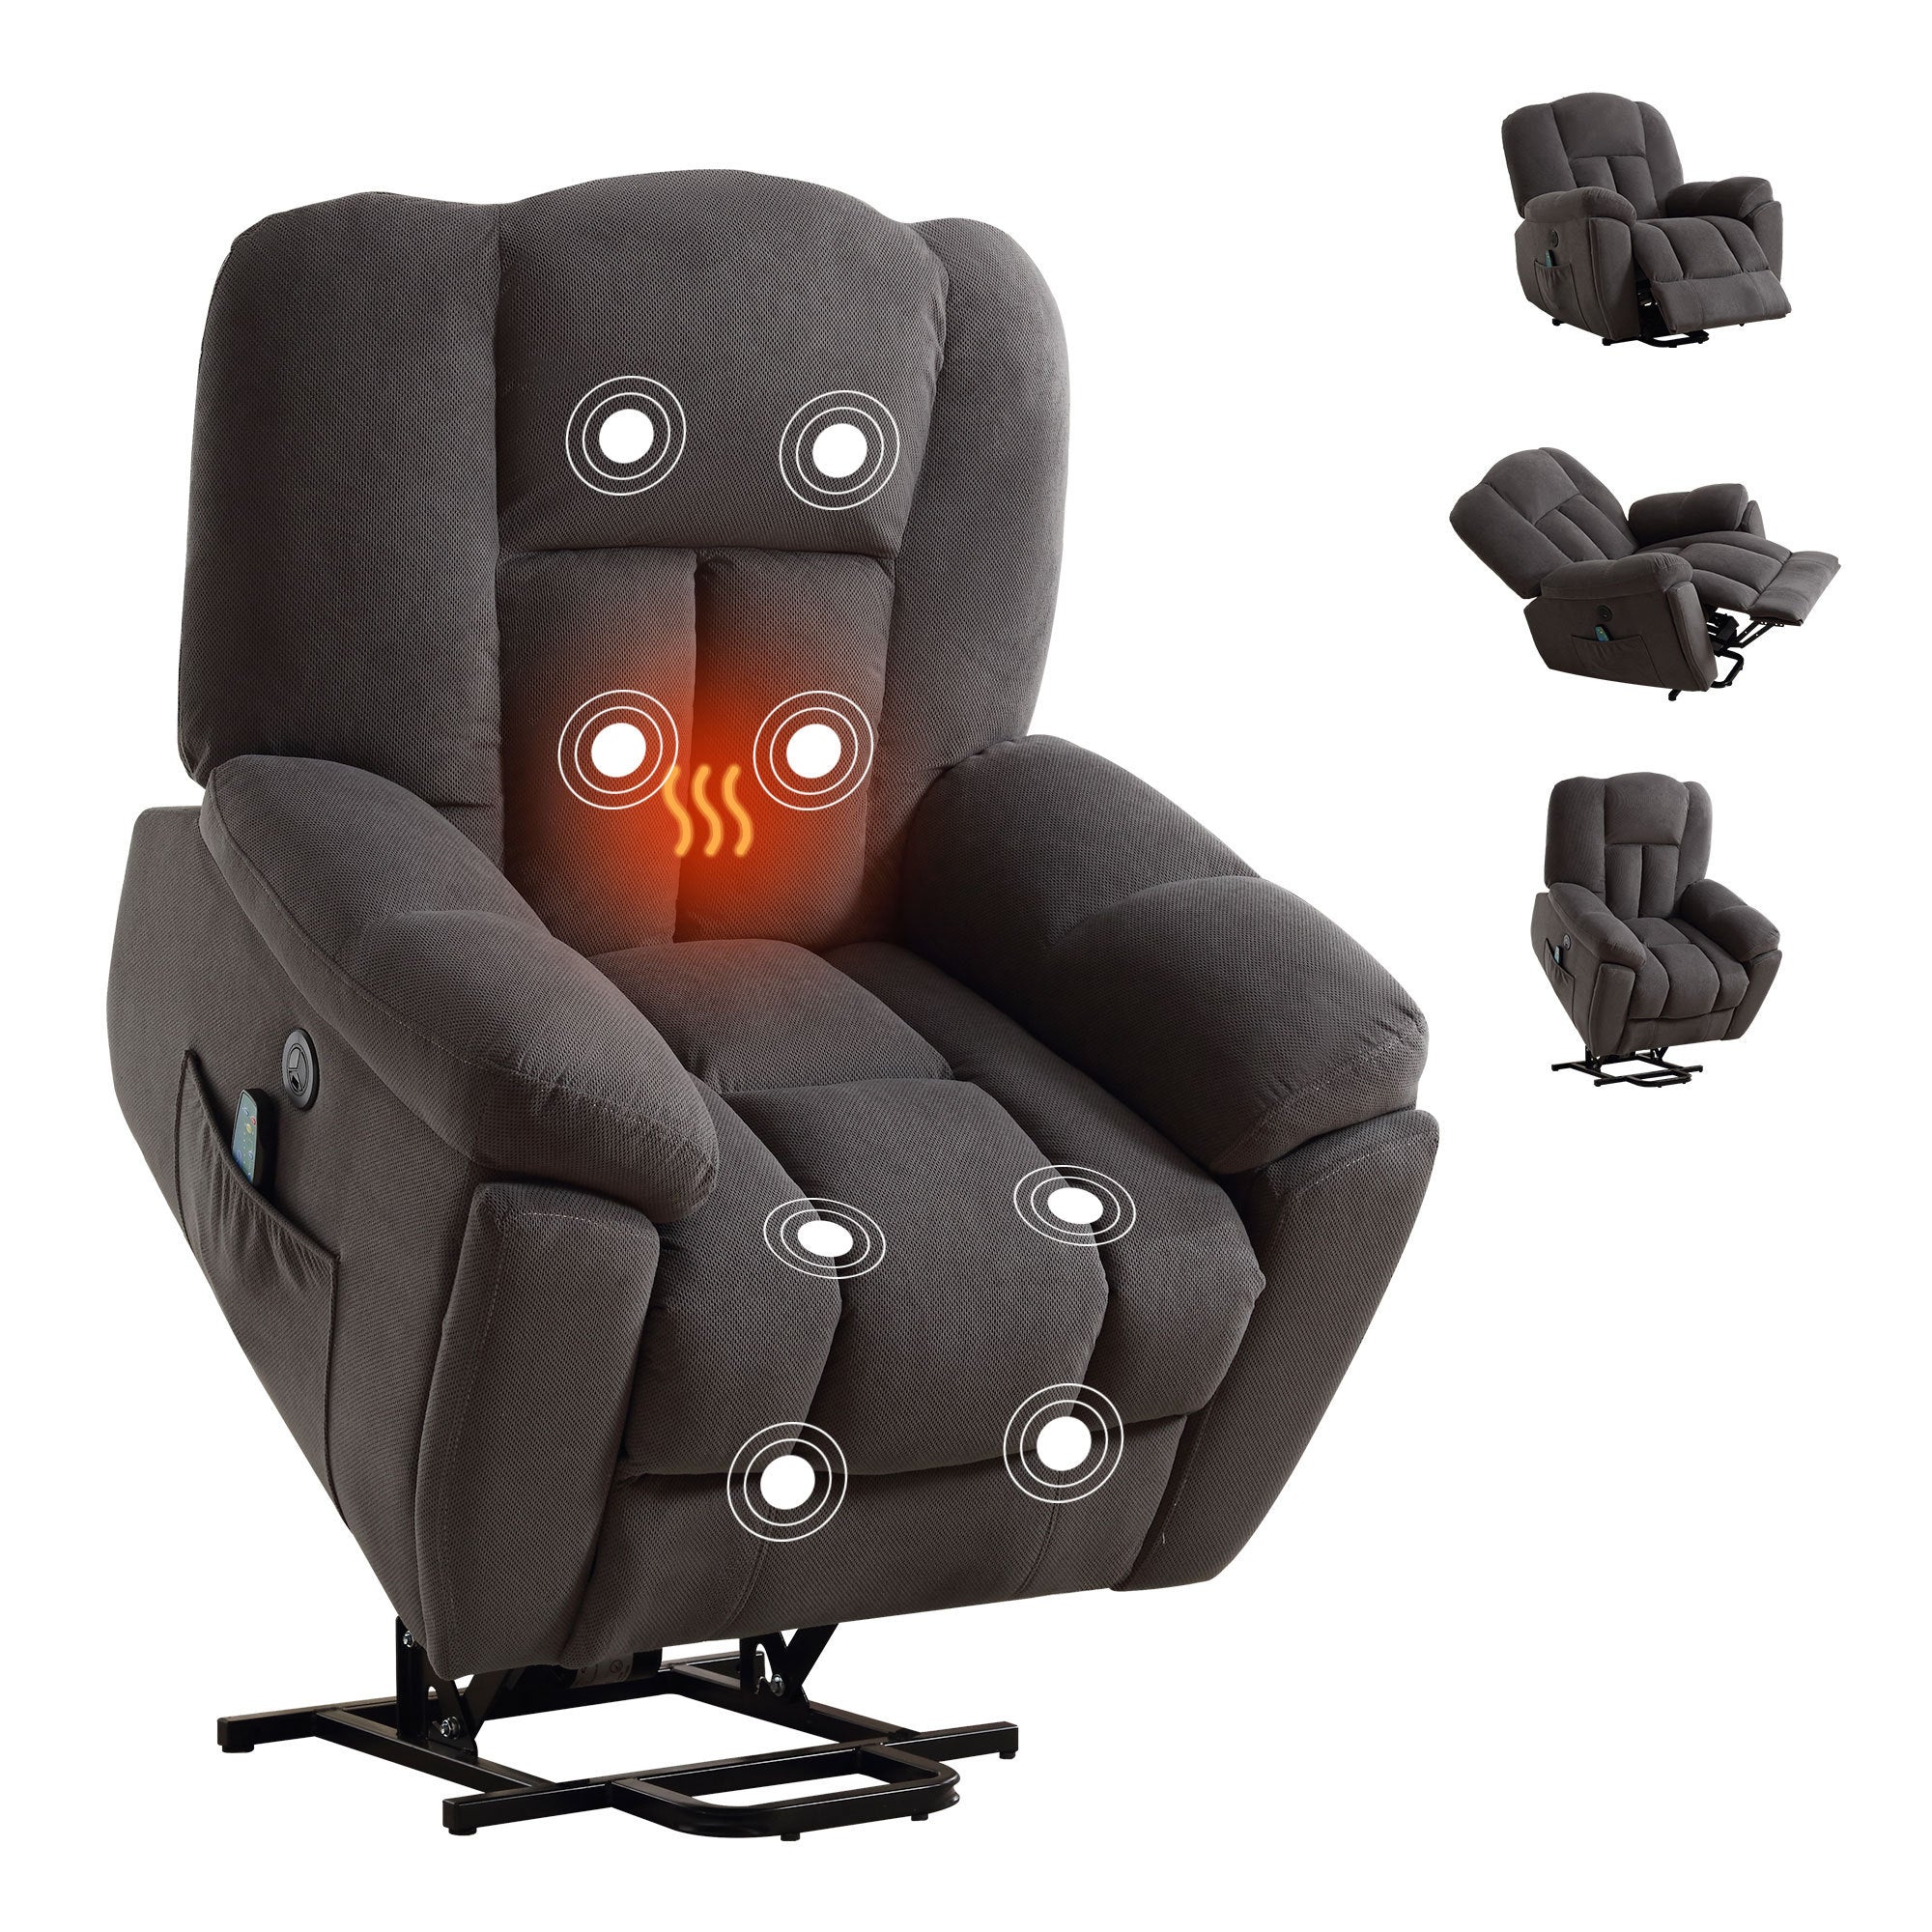 Infinite Position Power Lift Recliner with Heat and Massage, positions and massage points